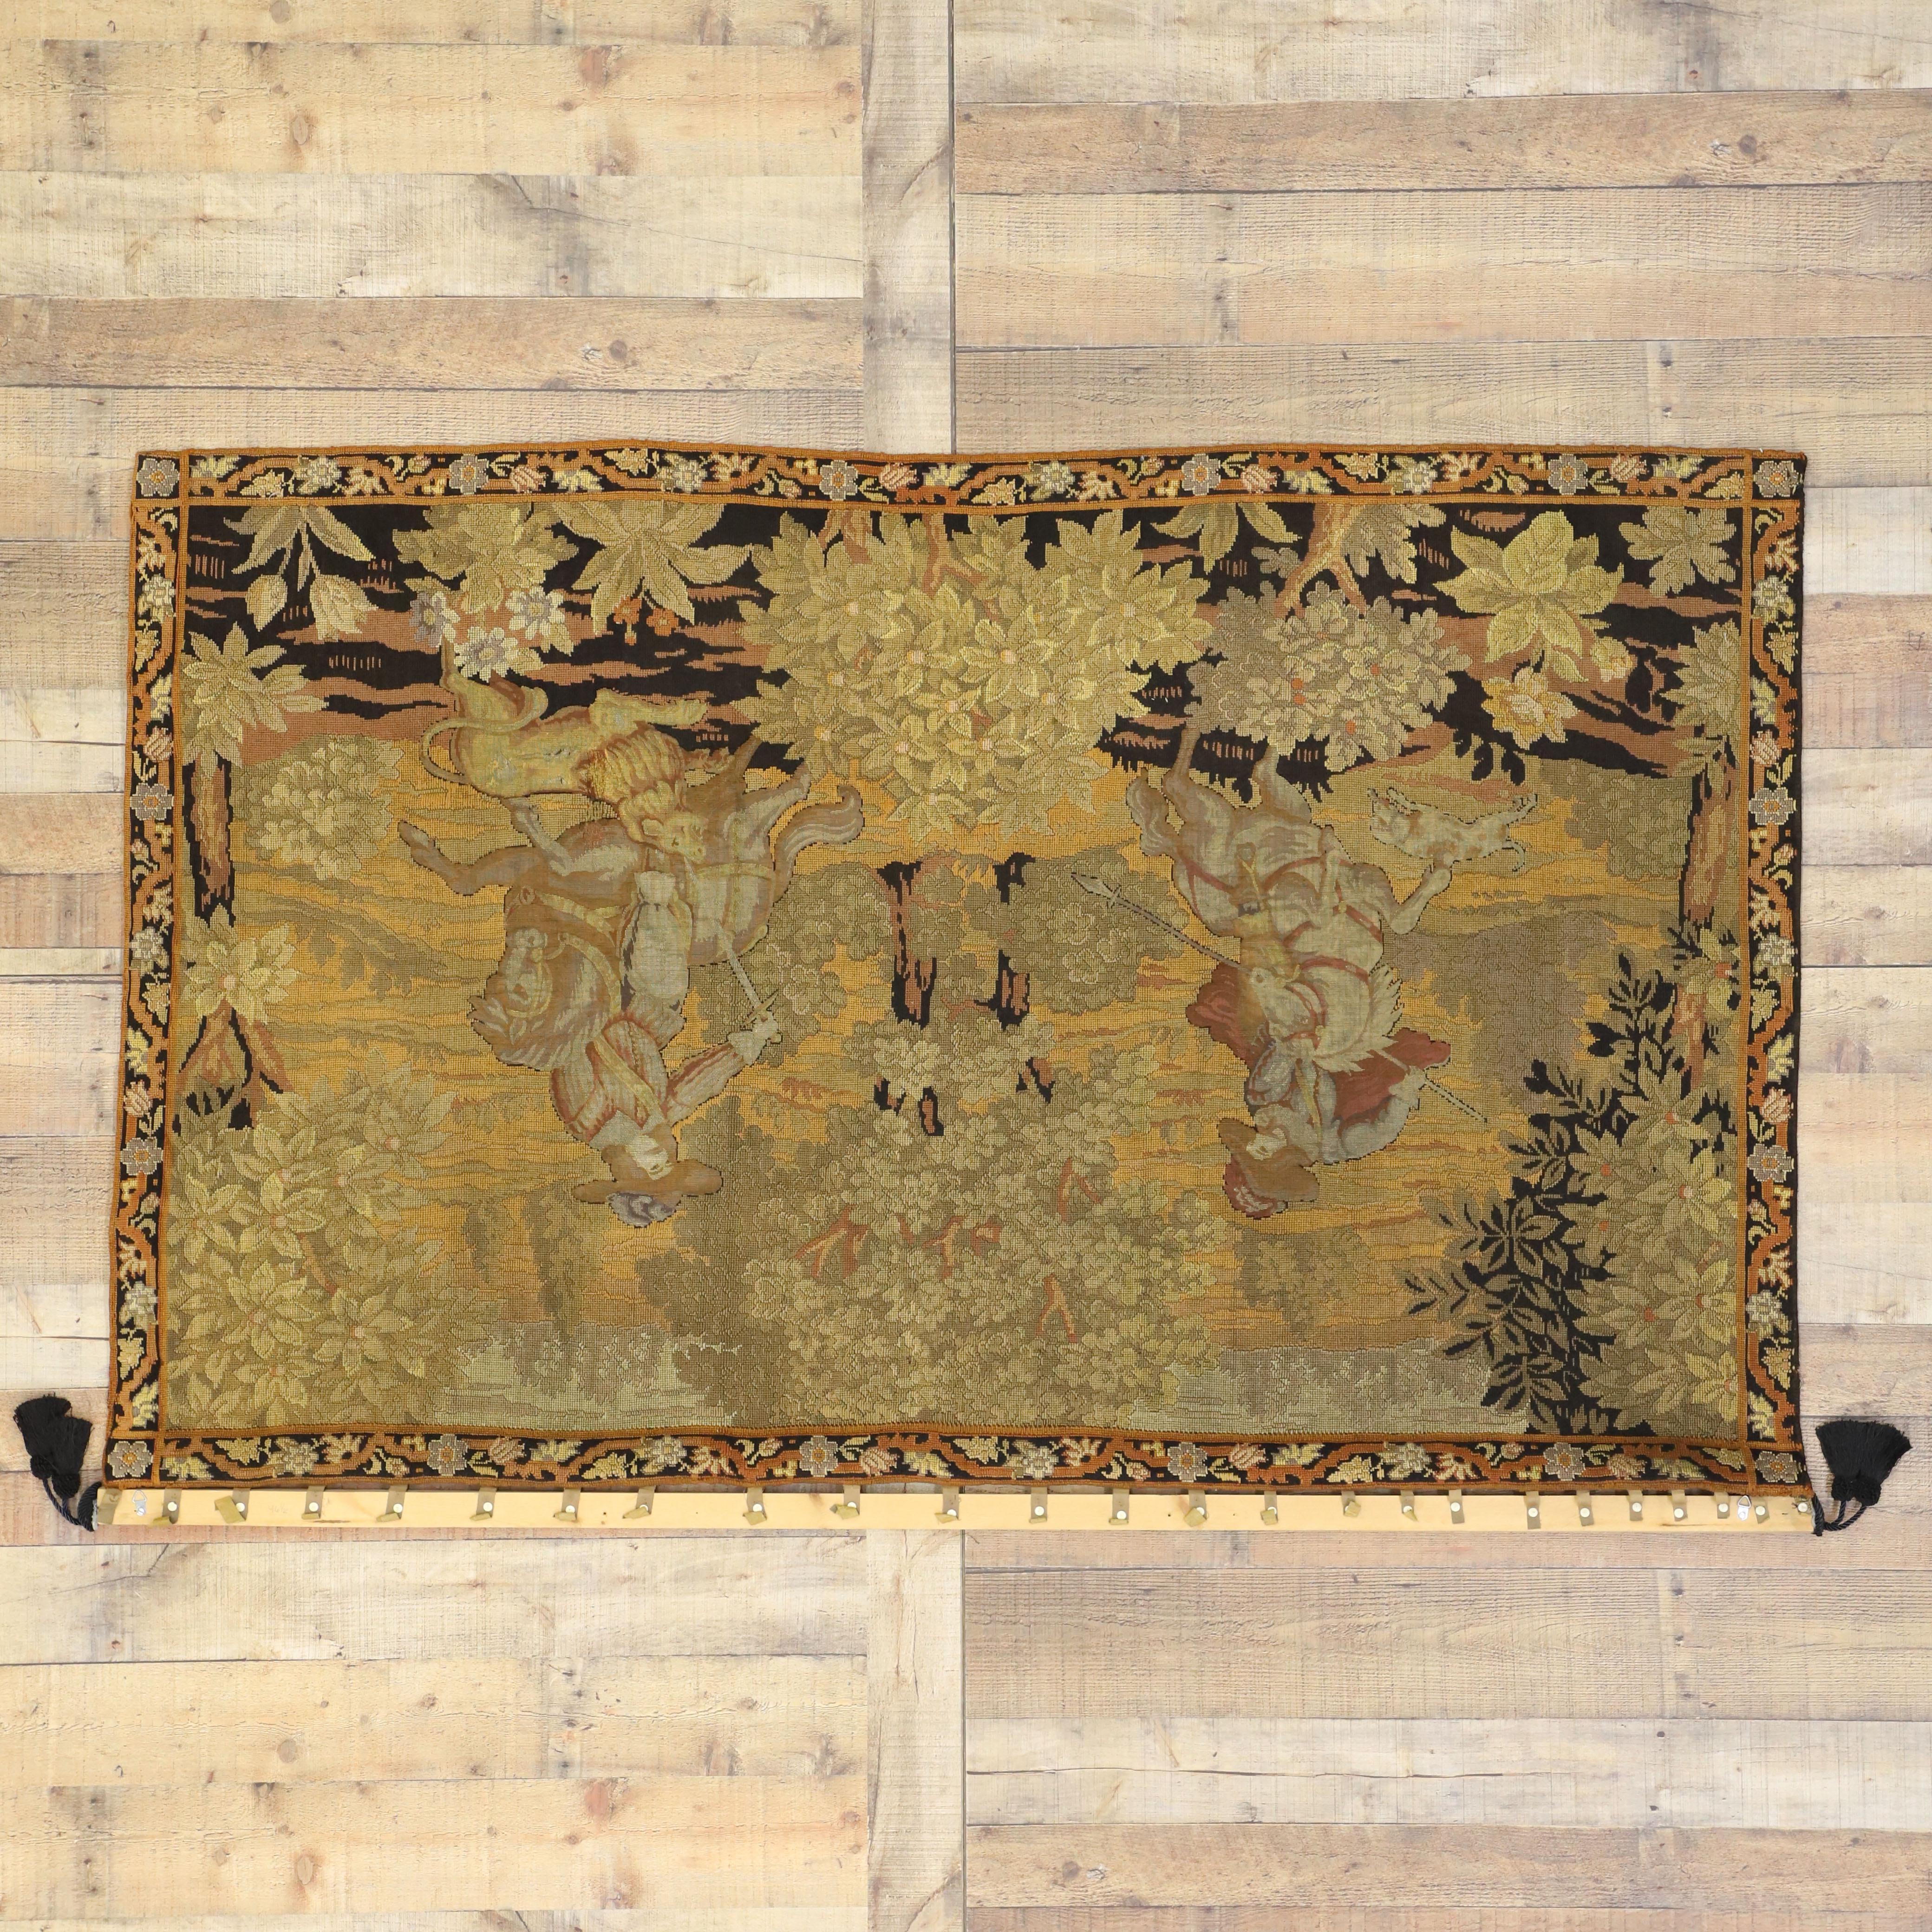 Wool Antique English Tapestry with Medieval Hunting Scene, Wall Hanging